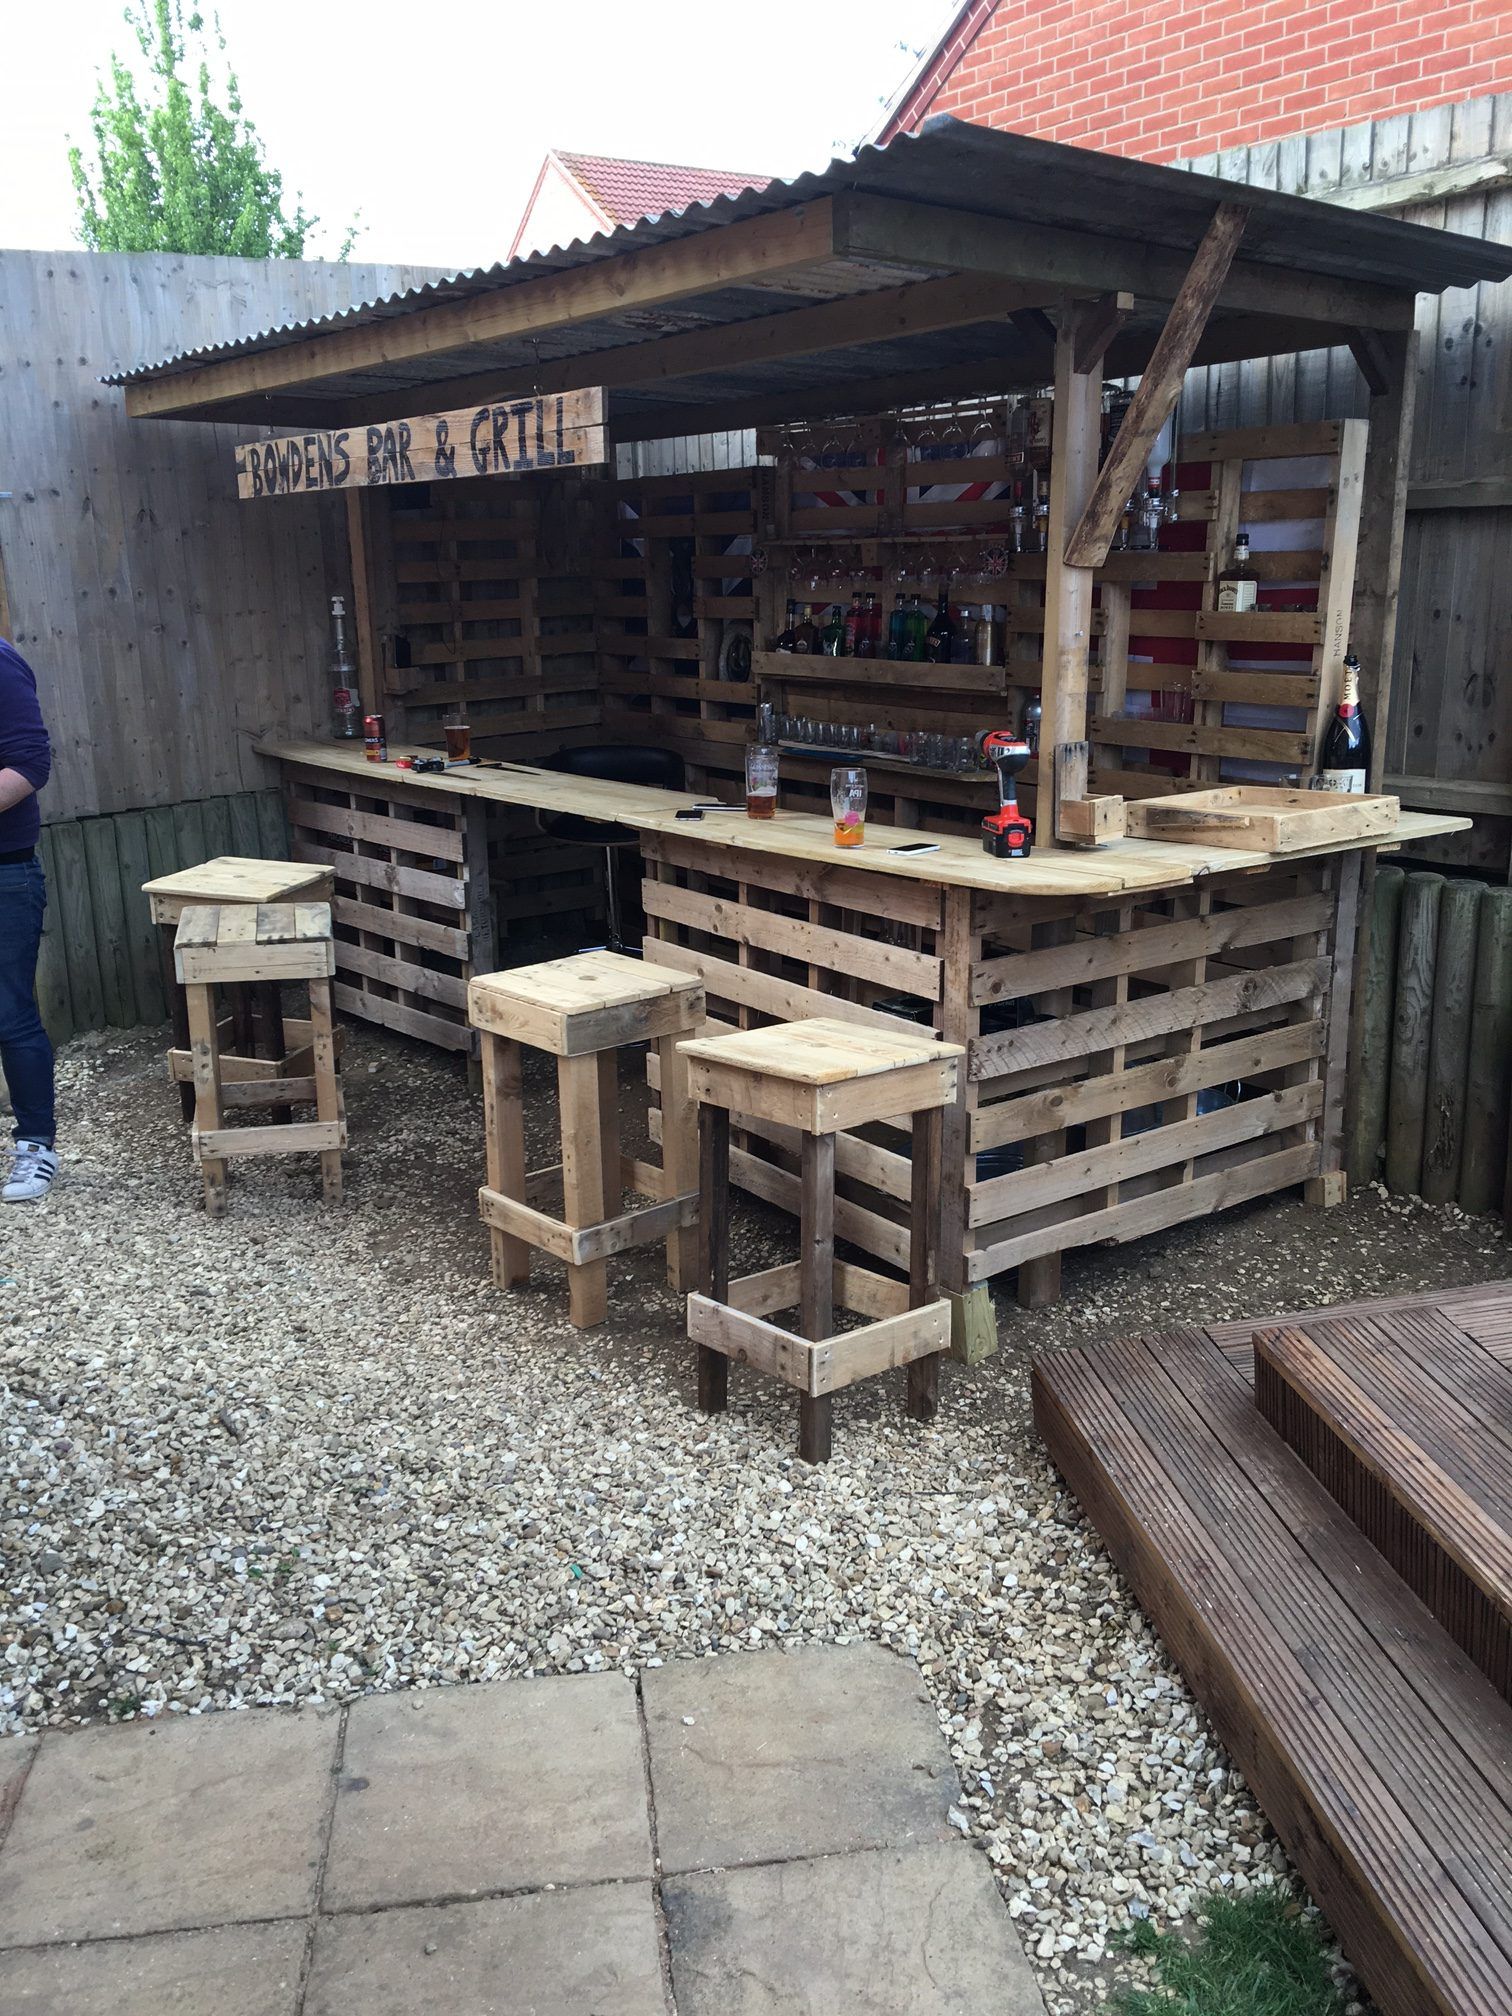 Garden bar how to turn a pile of old pallets into a cool outdoor bar KWSFAOP